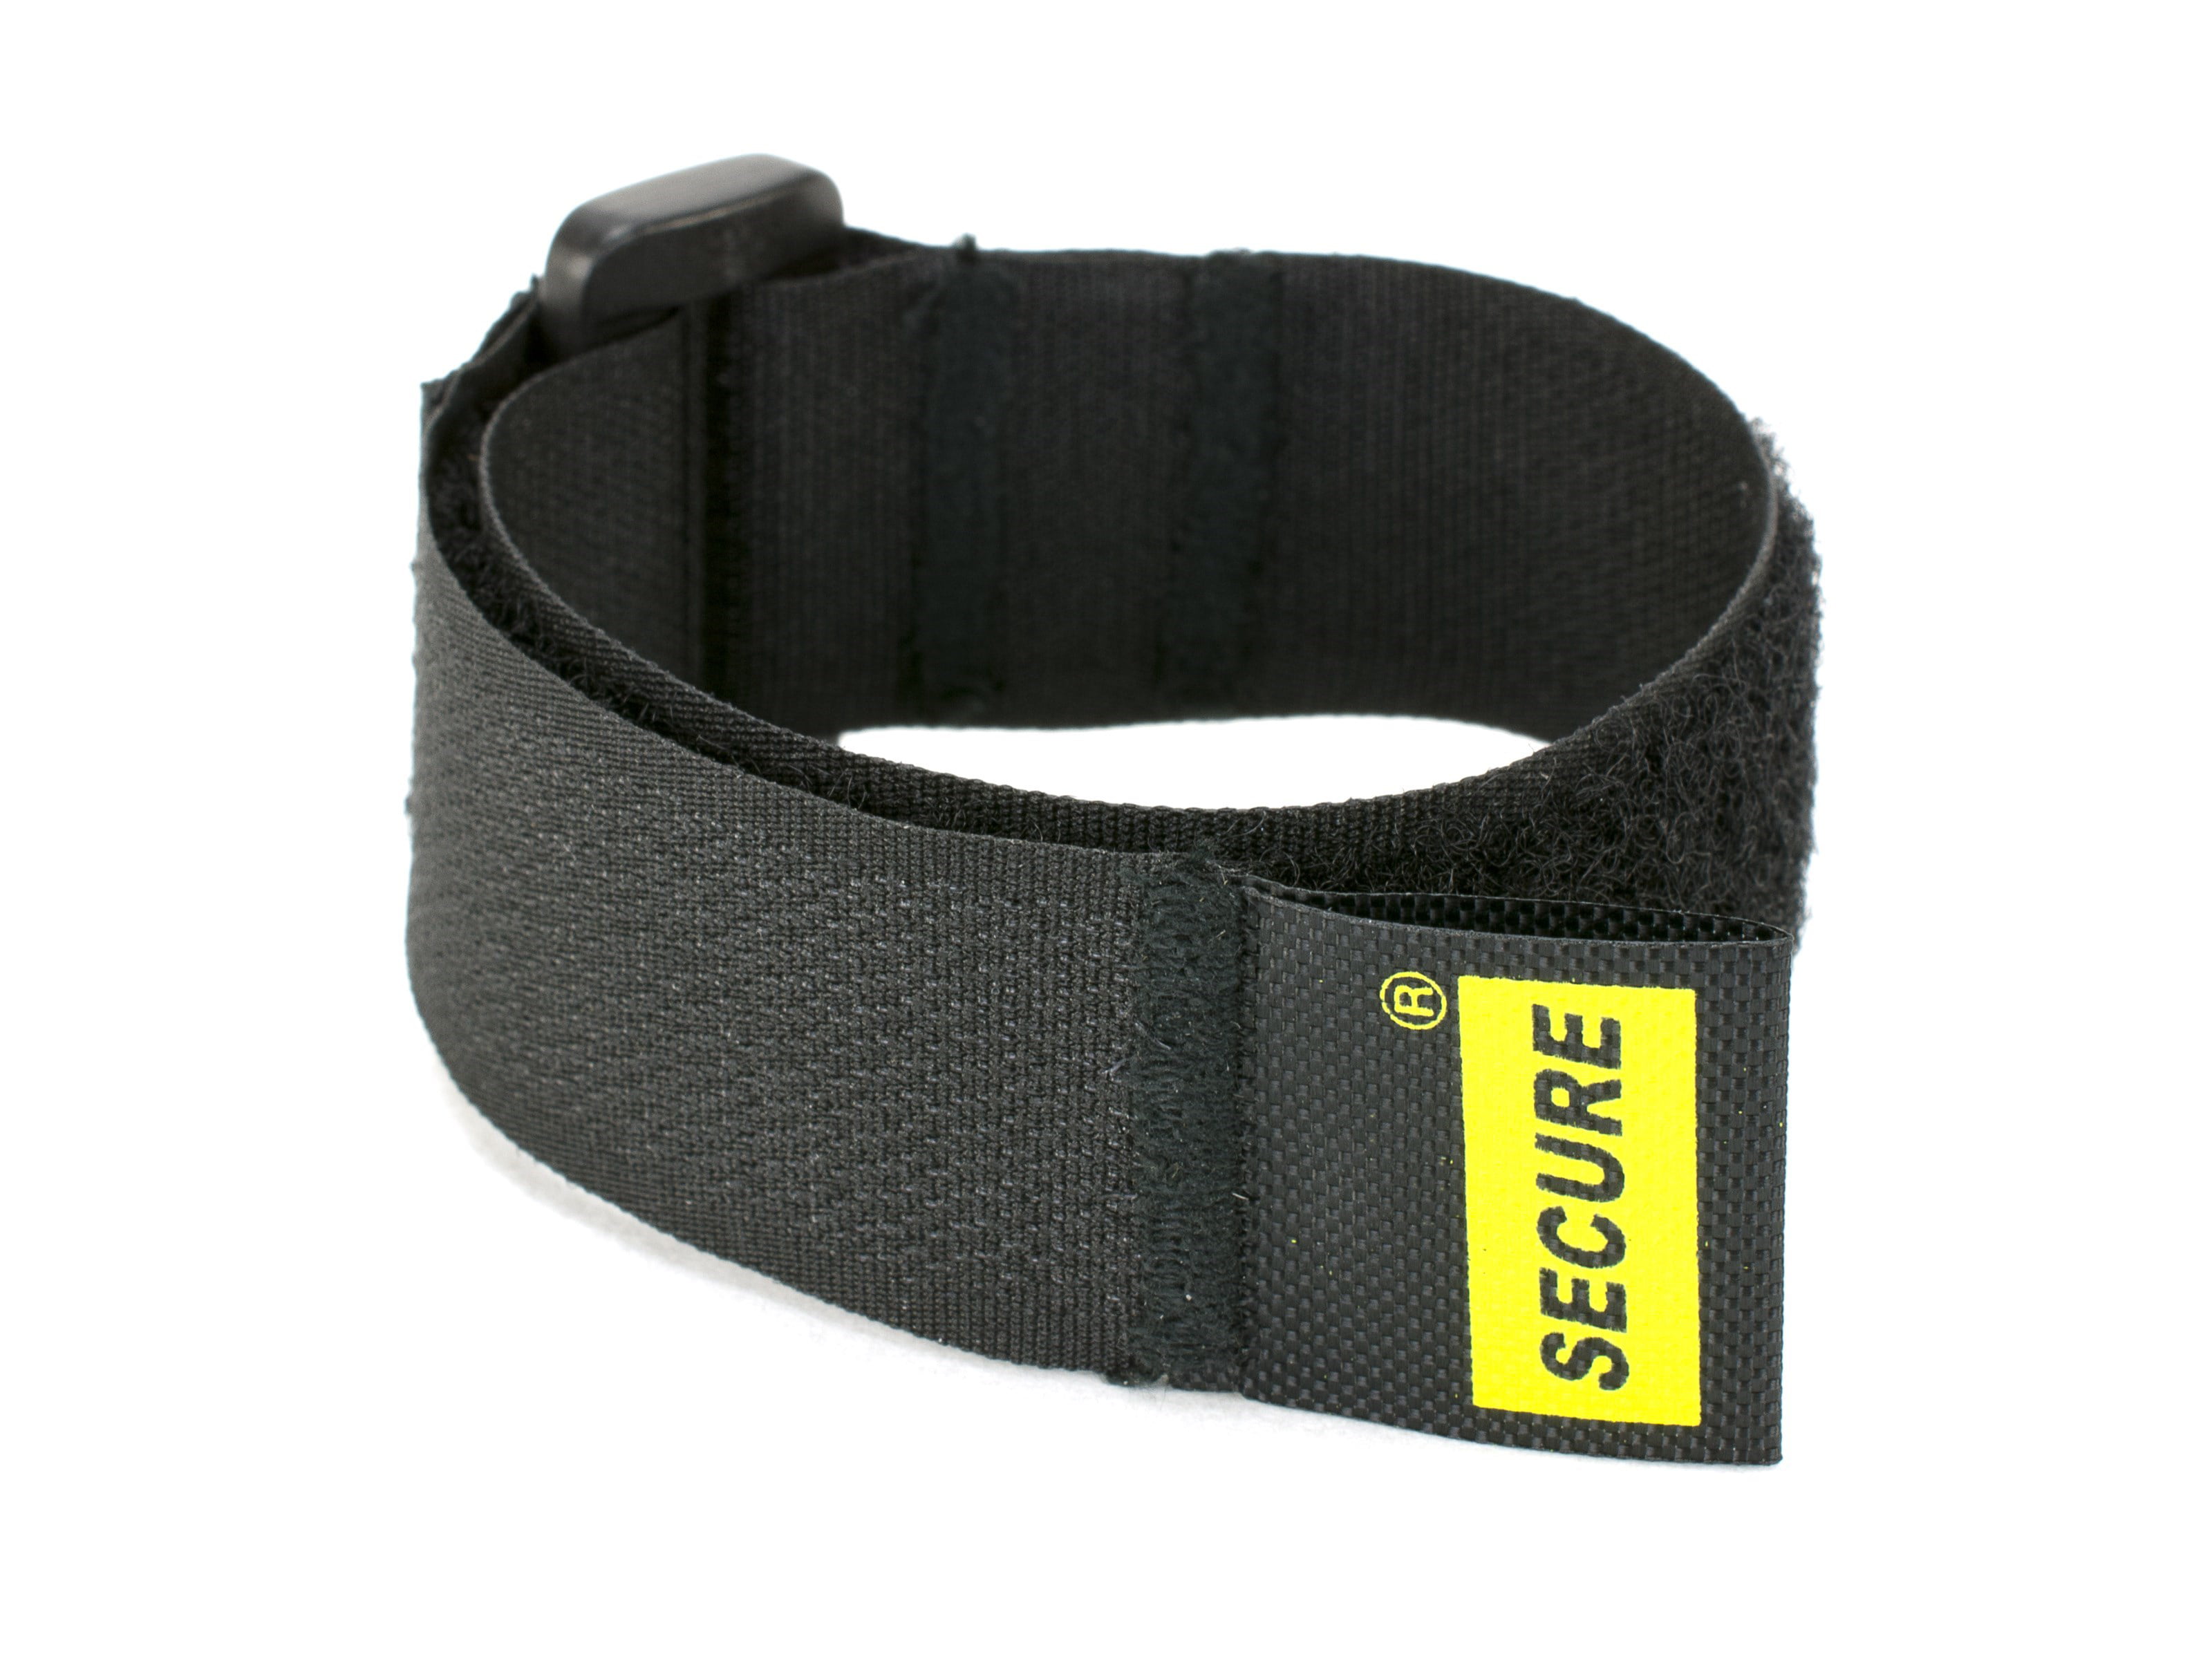 Secure Cable Ties All Purpose Elastic Cinch Strap - 12 inch - 5 Pack